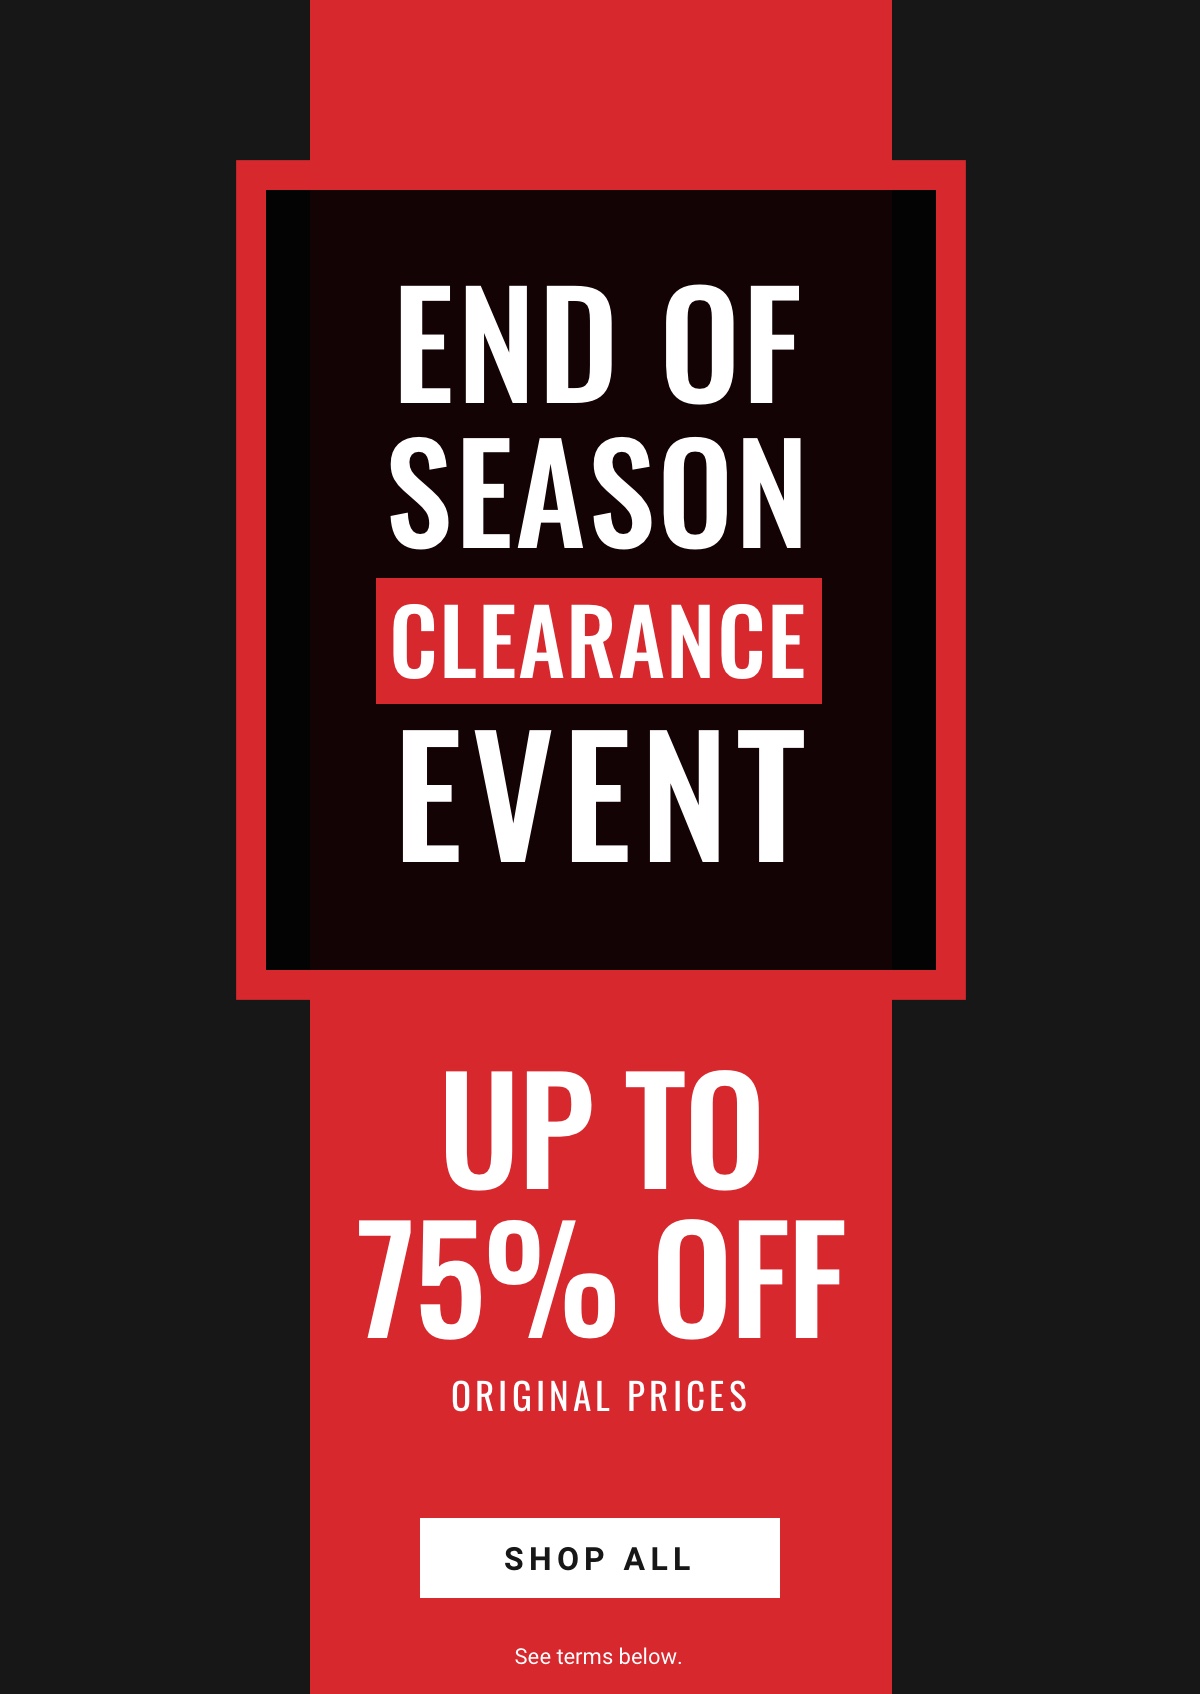 End Of Season Clearance Event Up to 75% Off Original Prices CTA Shop All